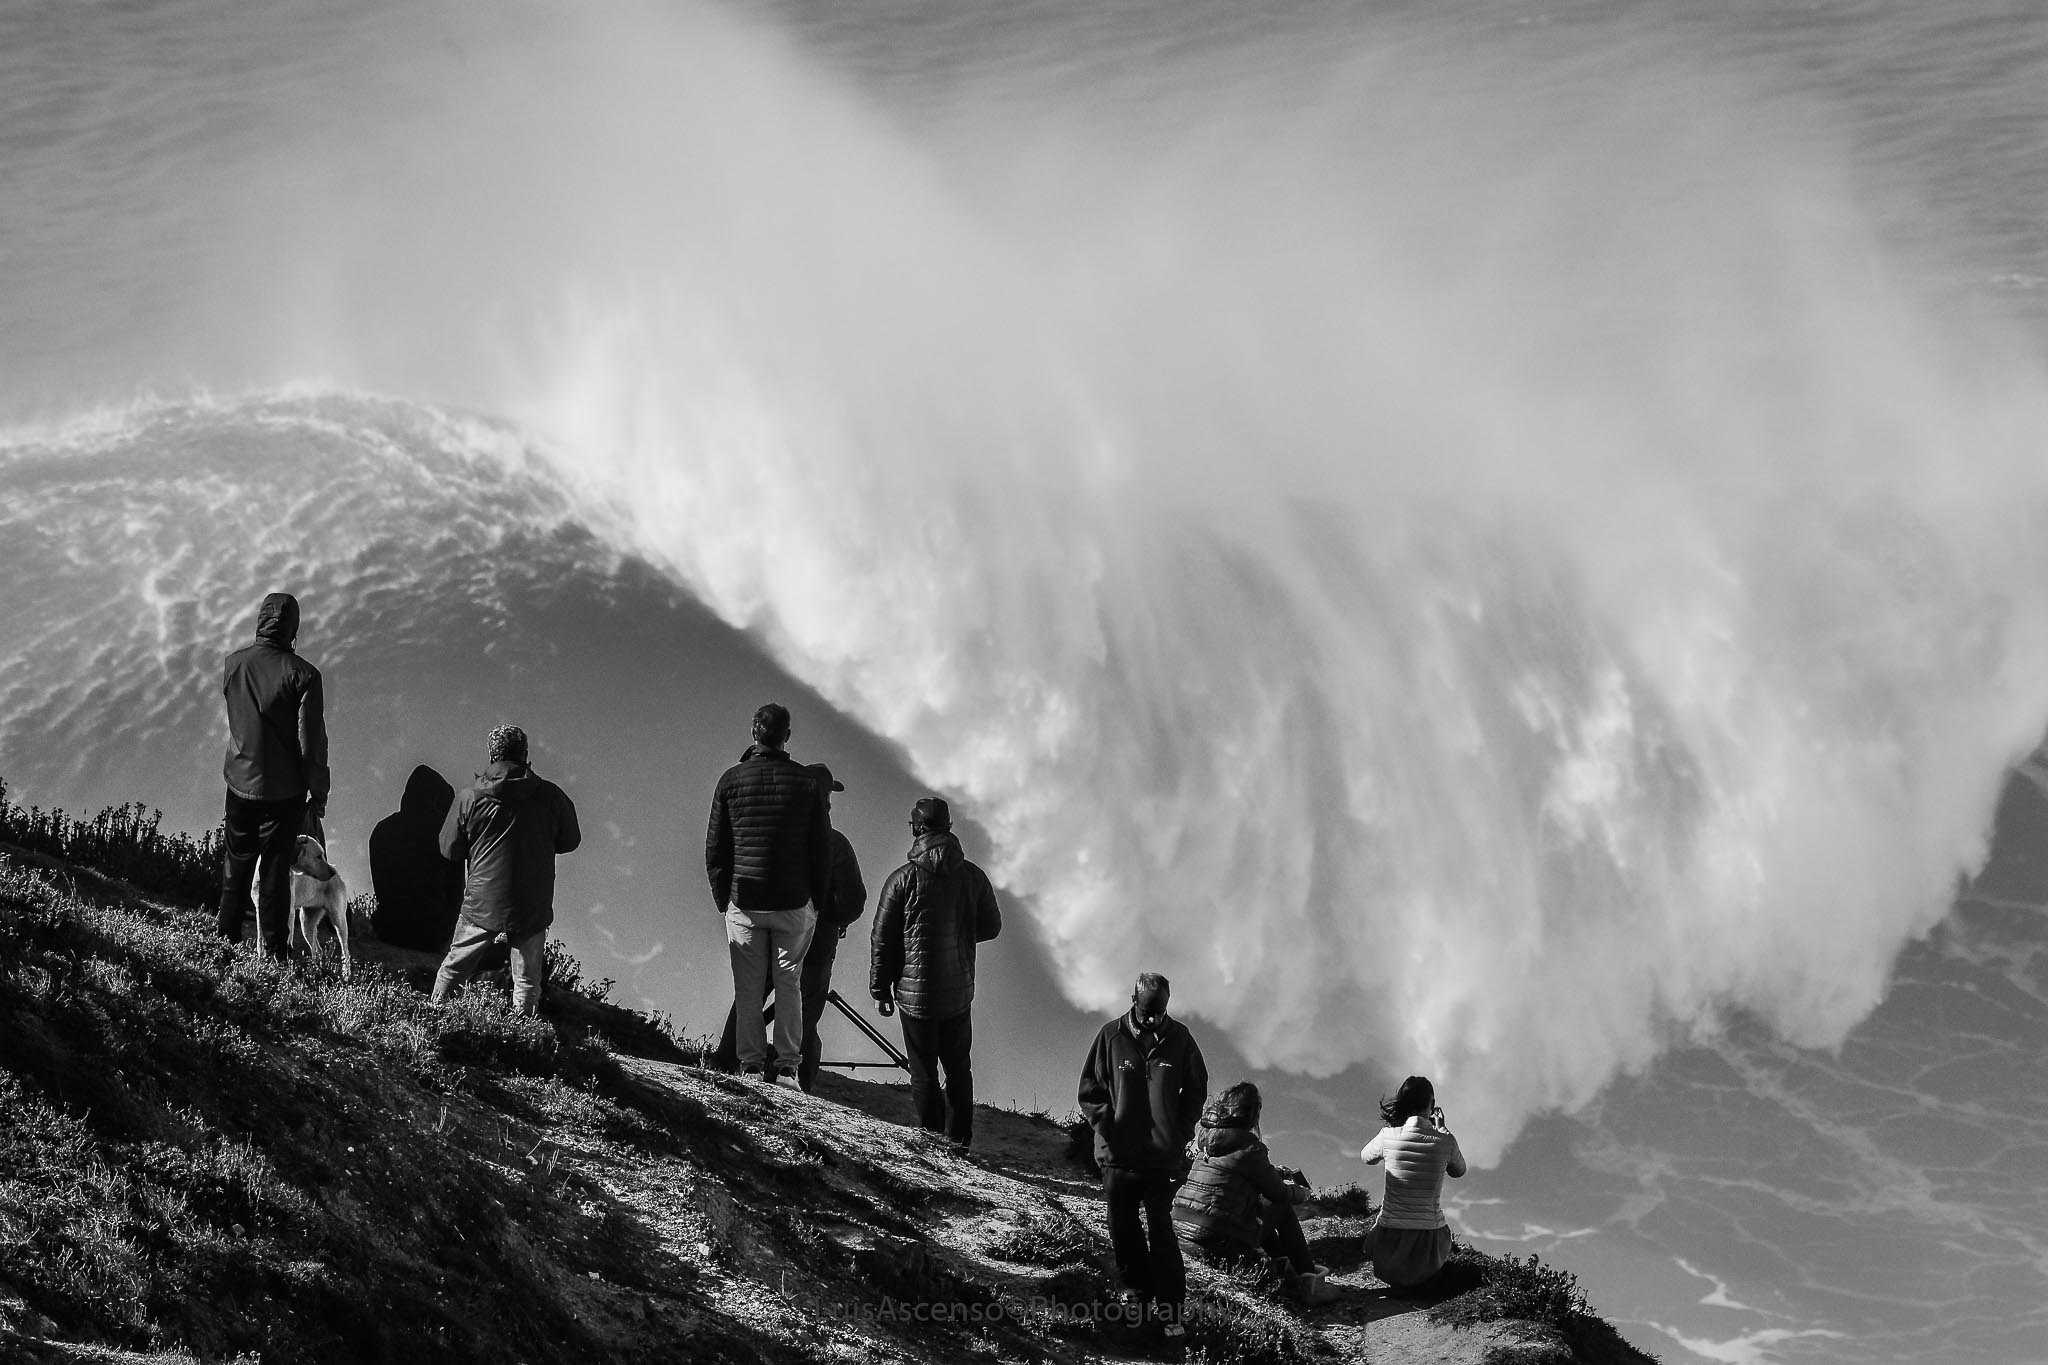 People watch a huge wave from a cliff in Nazaré, Portugal